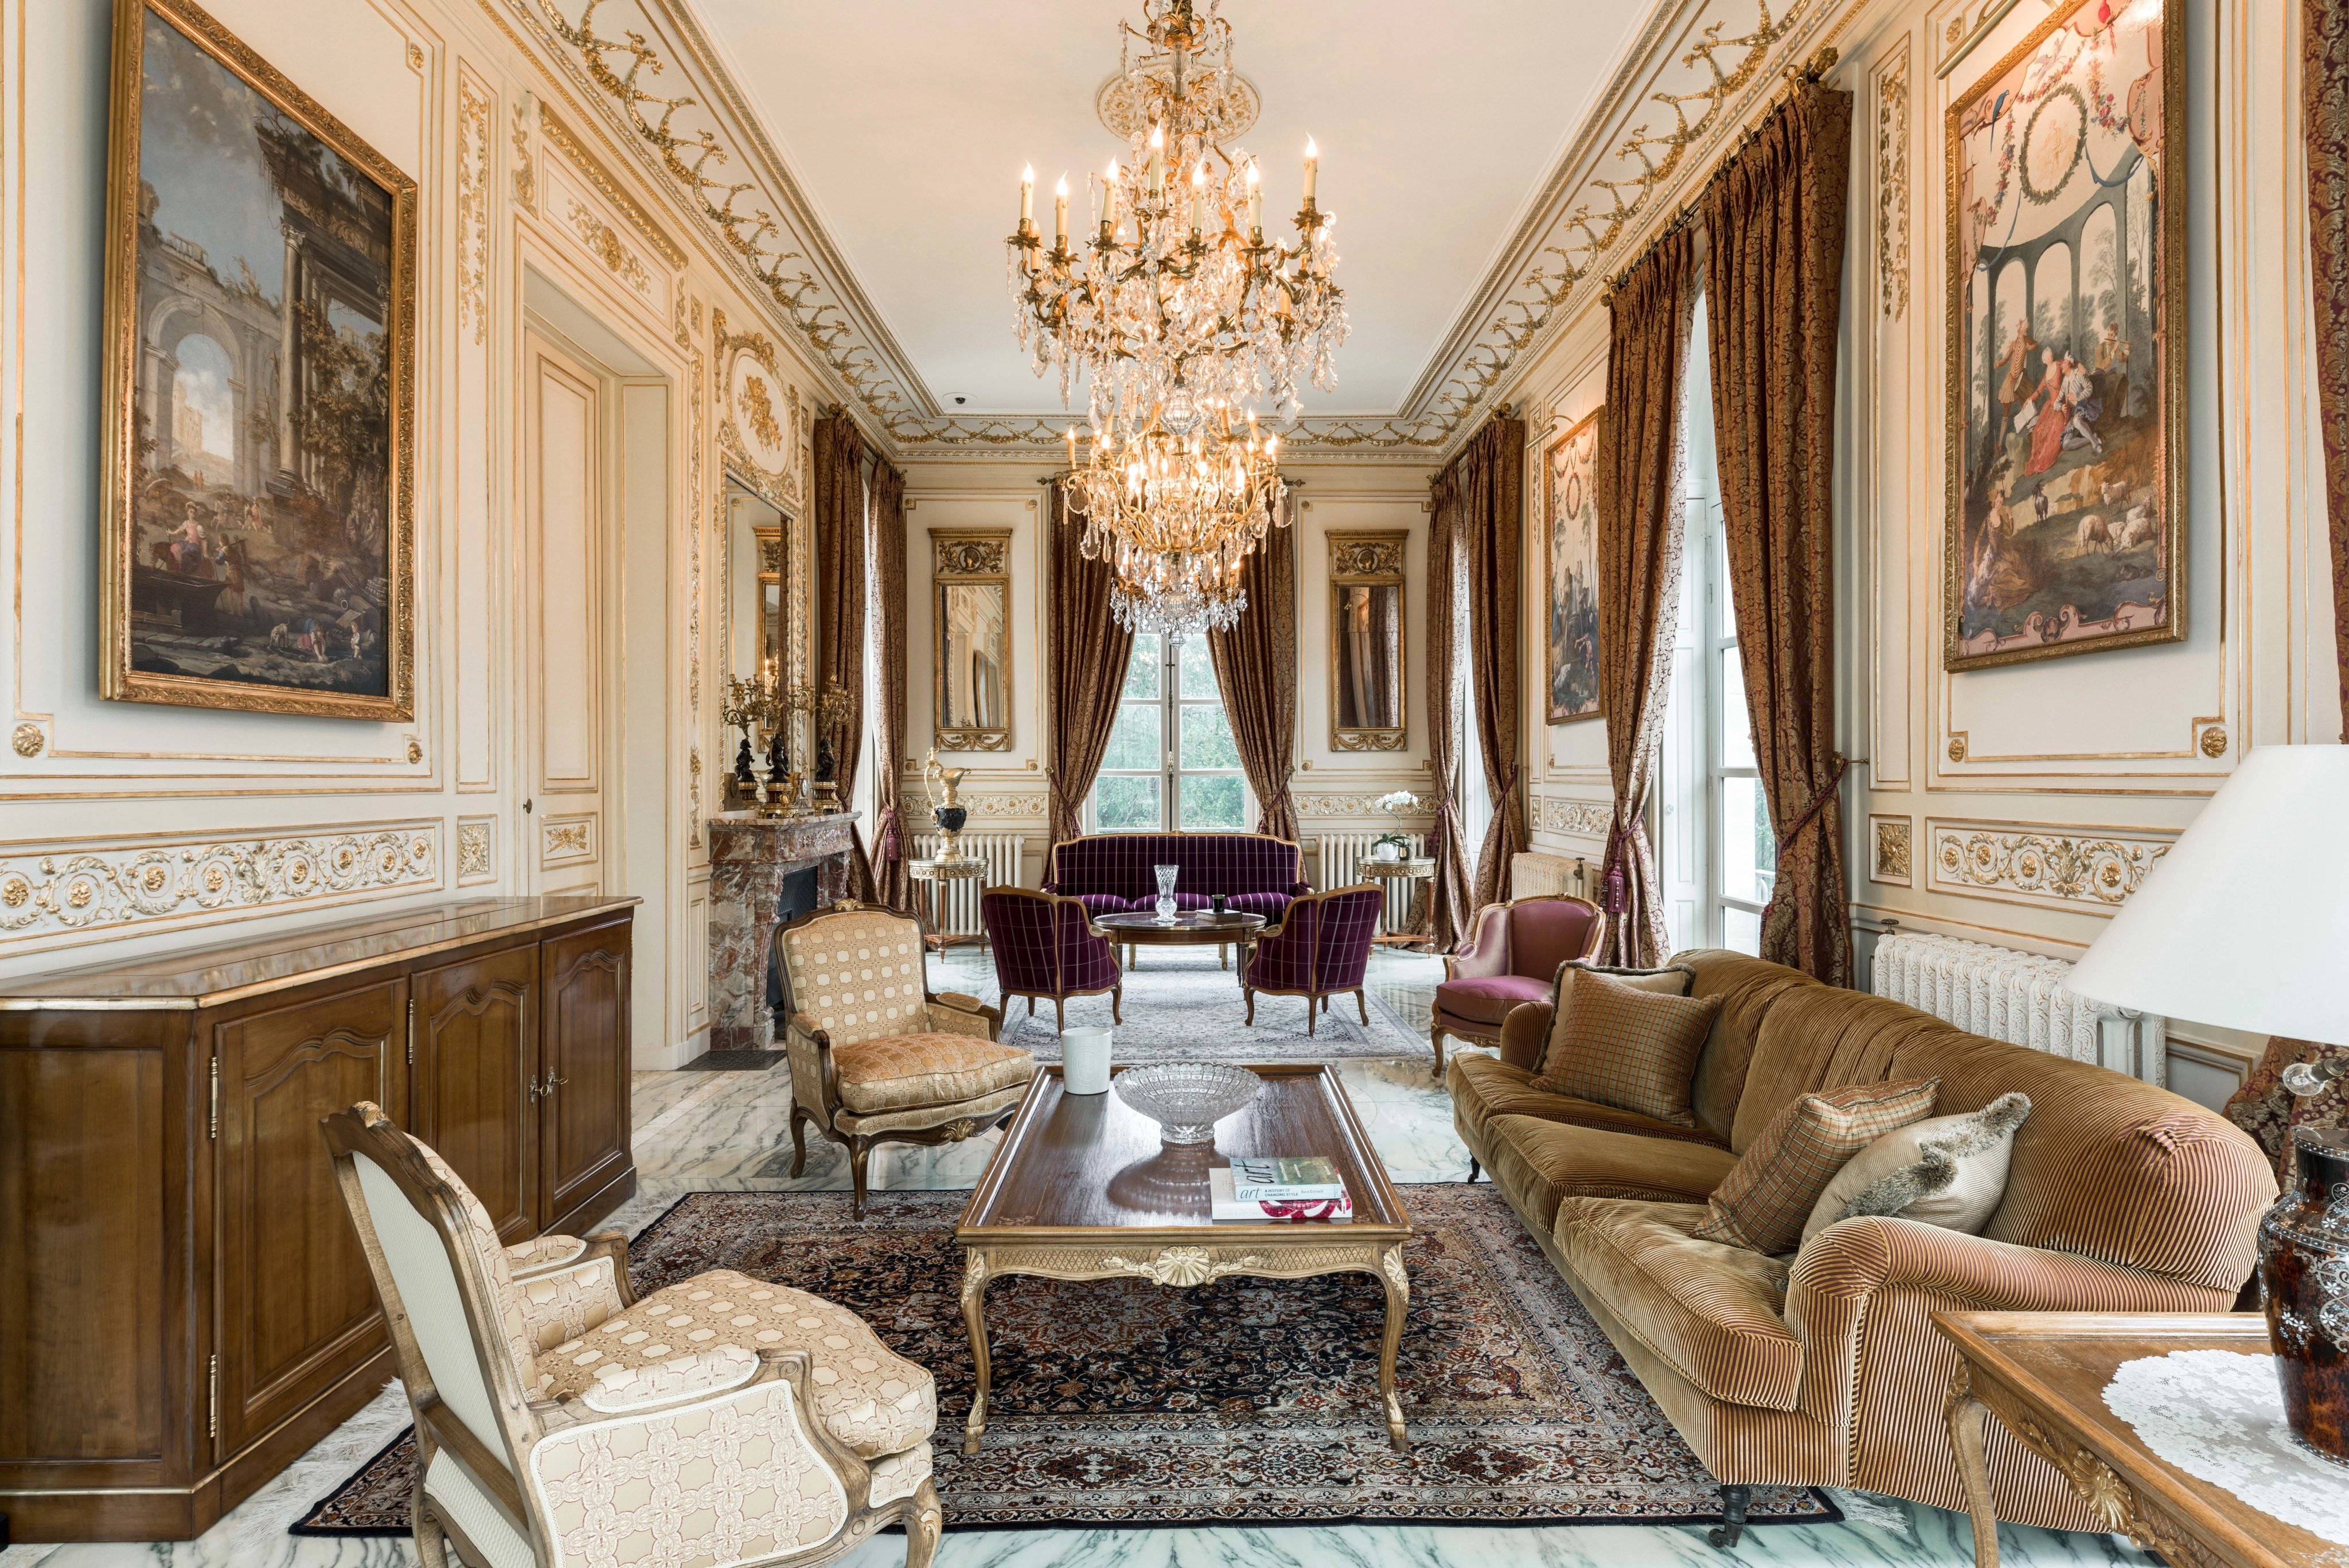 A sublime Palais inspired by Grand Trianon Palace, 20 min from Paris_1596